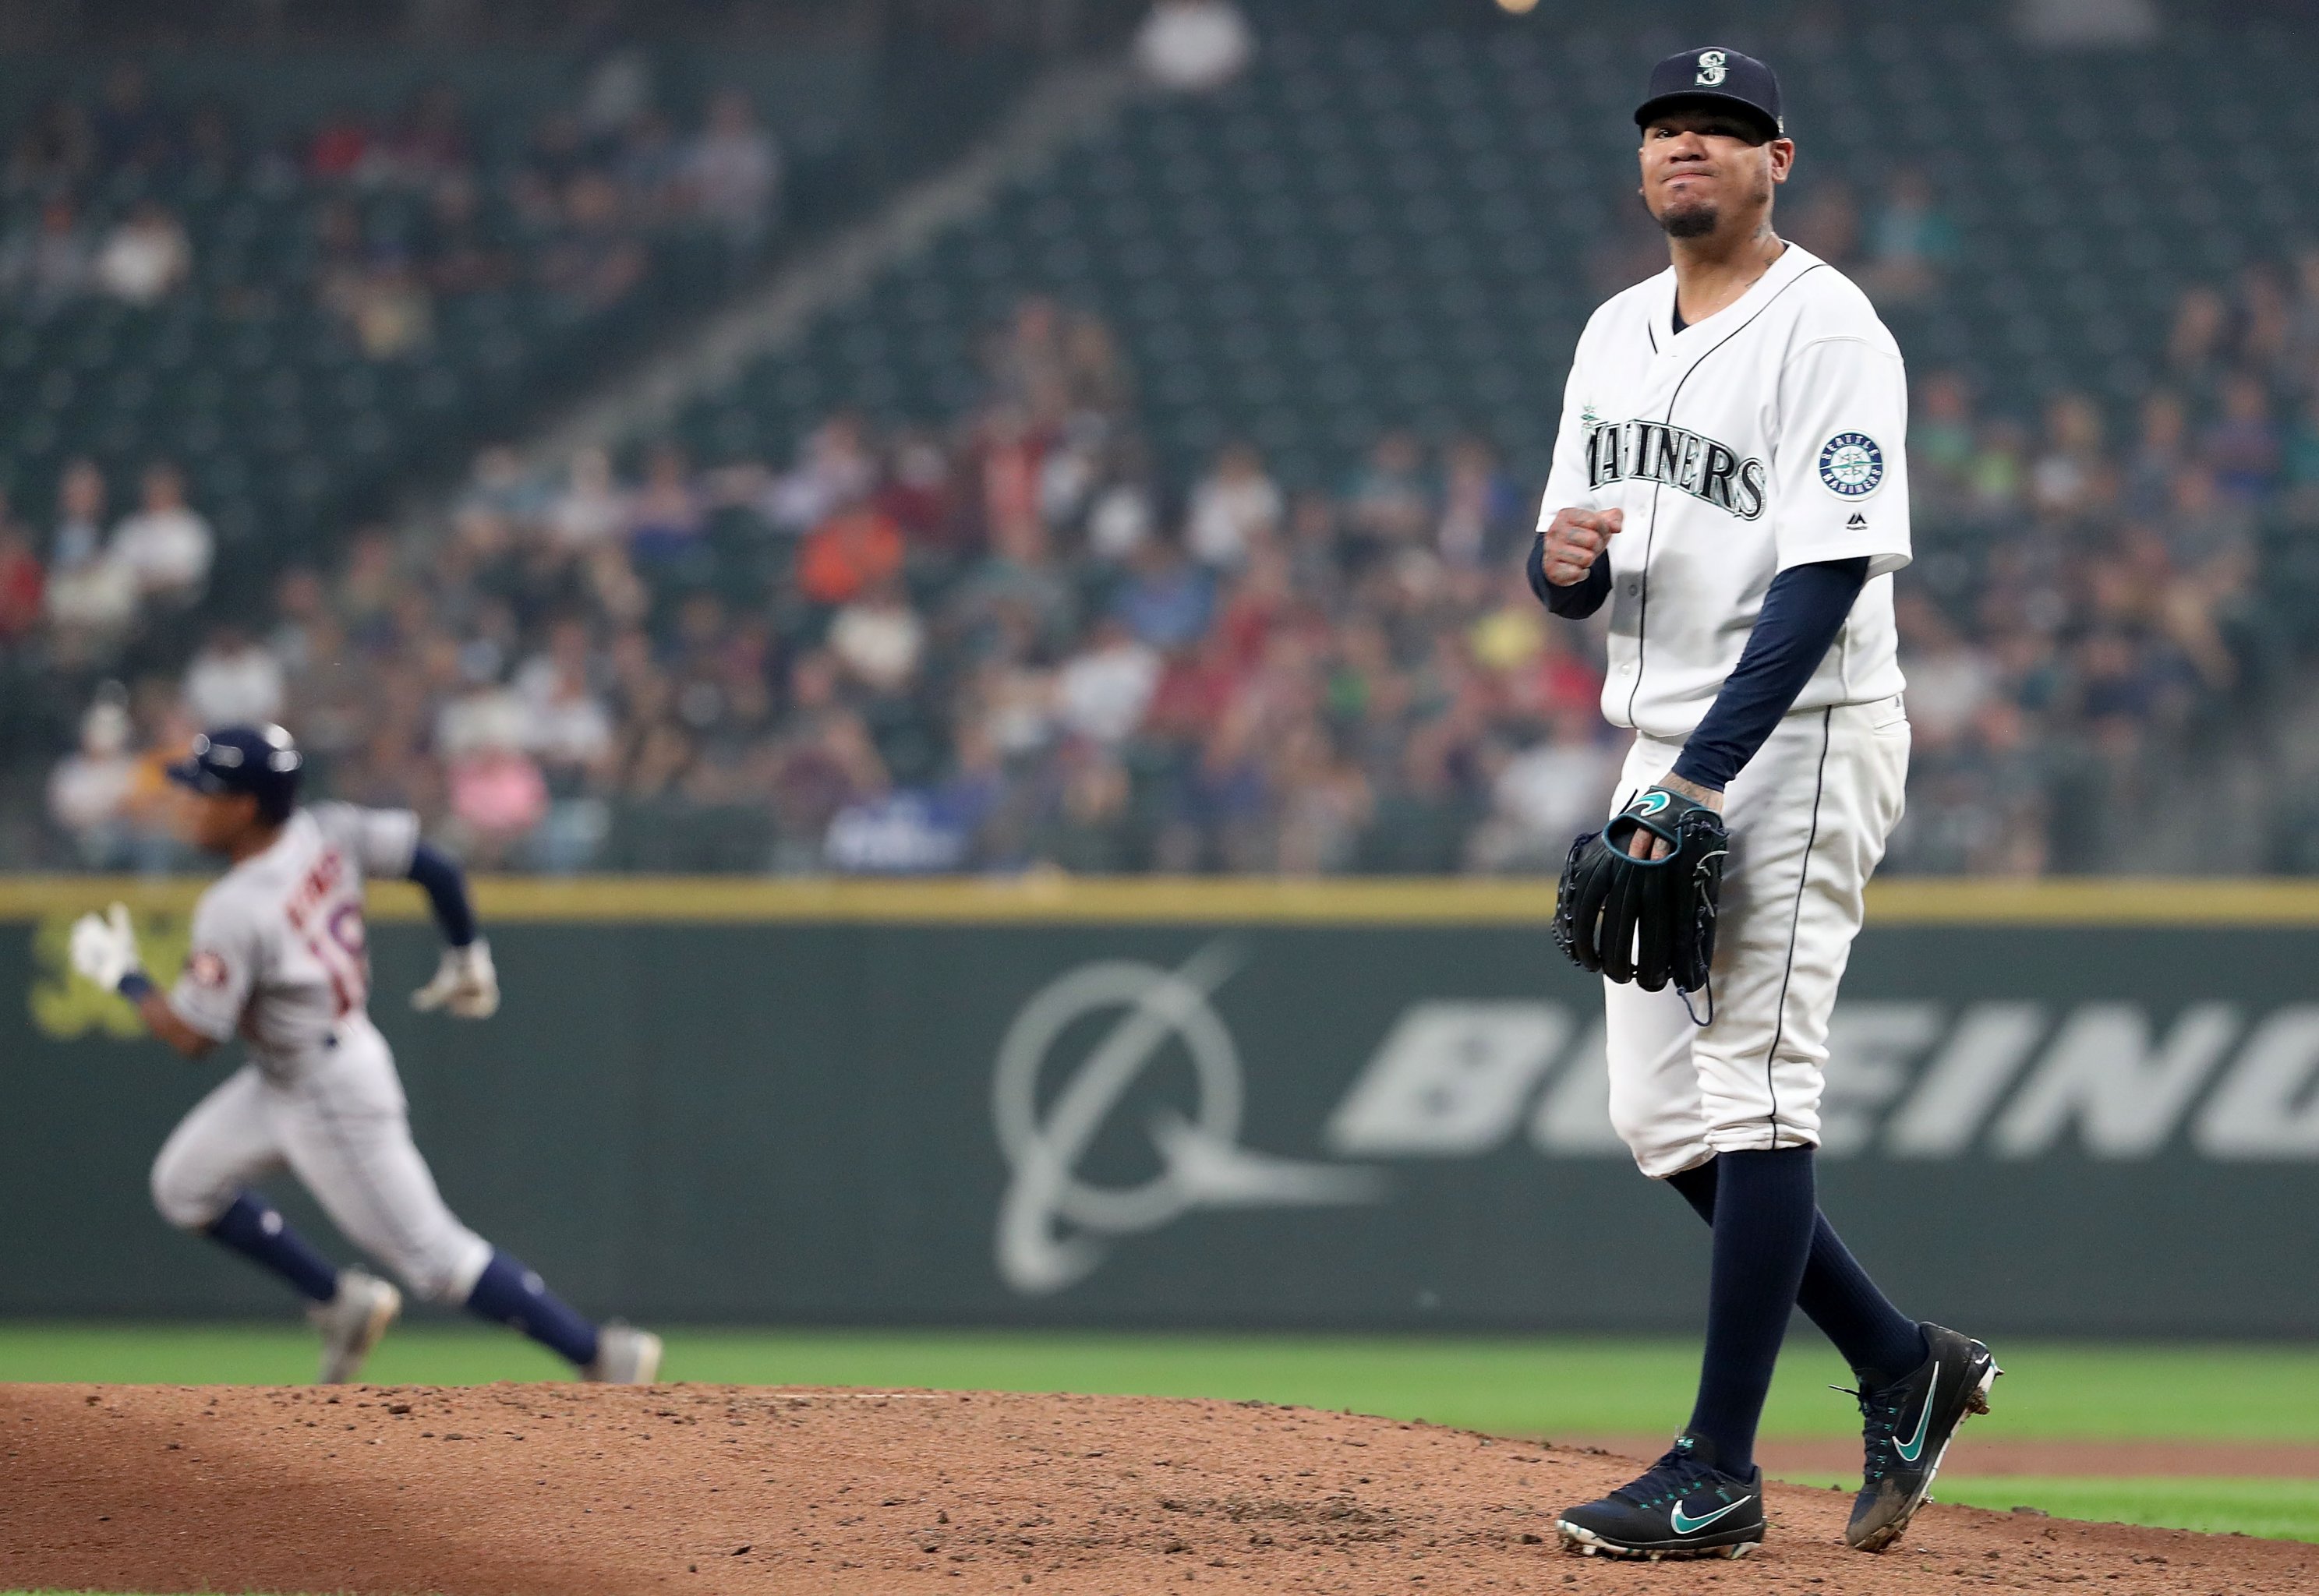 Filled with highs and lows, career of Felix Hernandez is